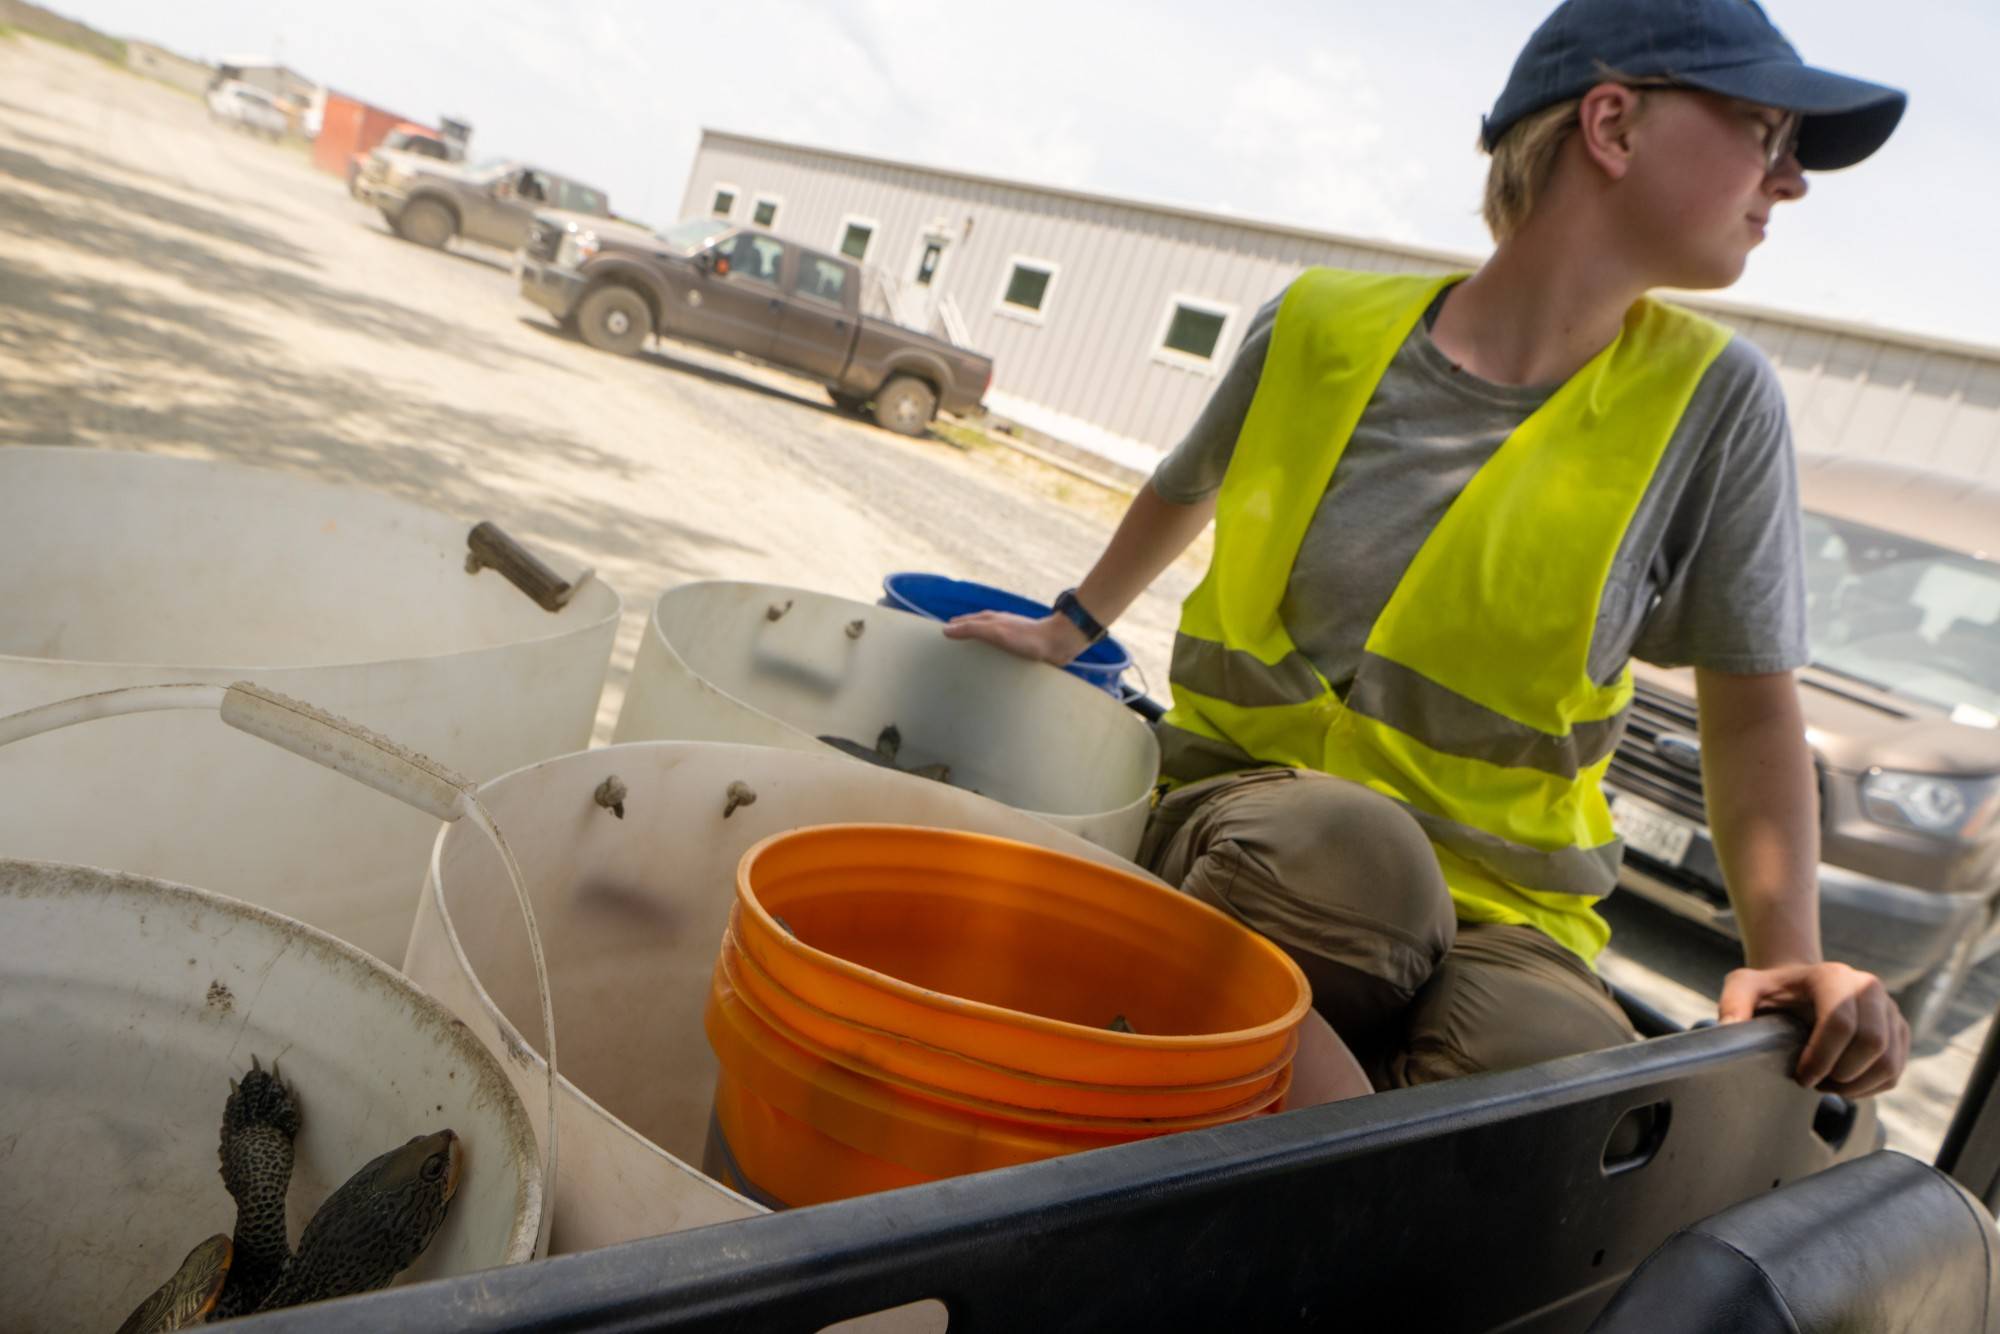 Undergraduate student Kendall Kuck watches over recently collected turtles in transit.